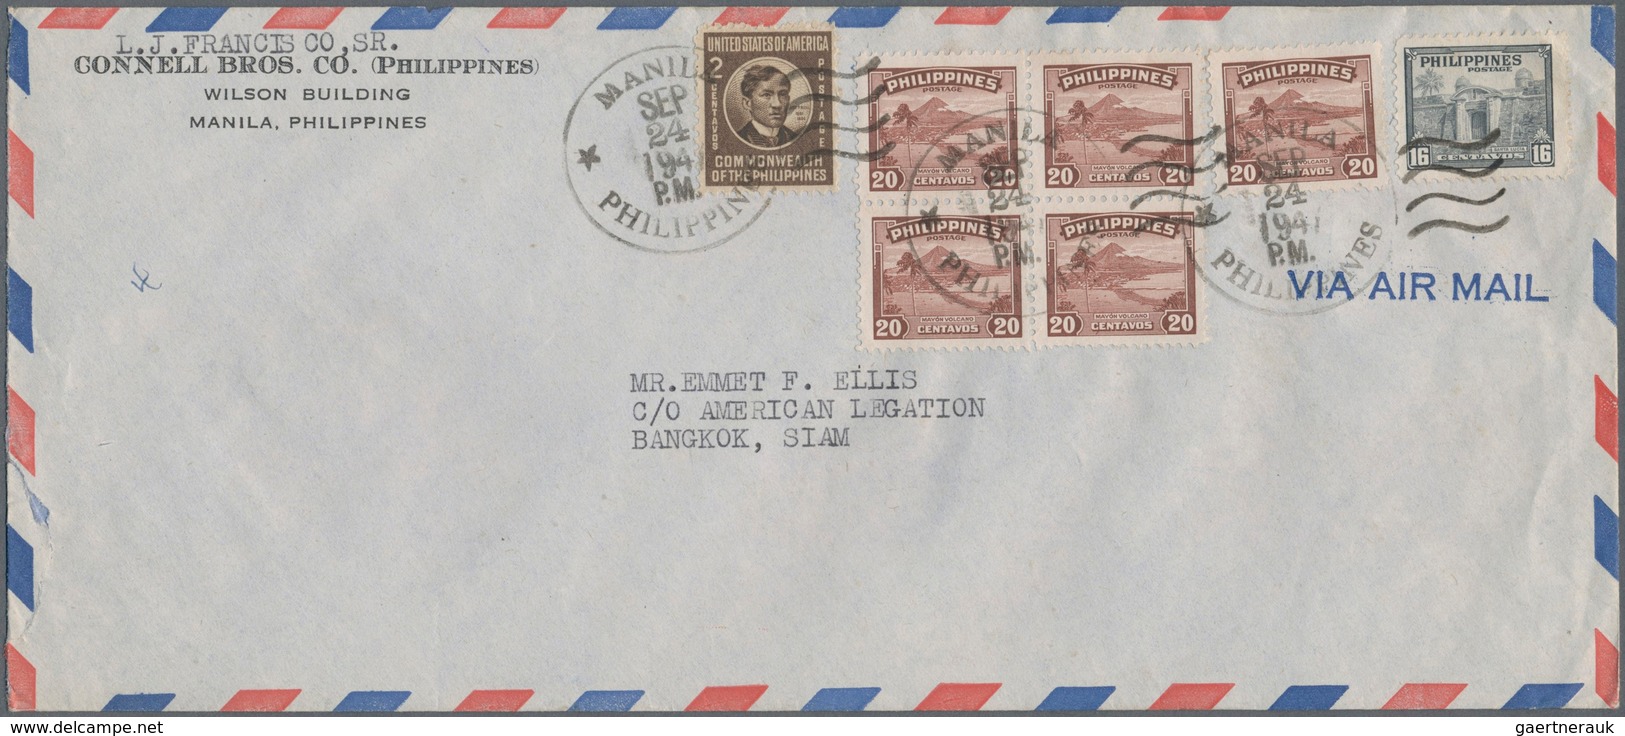 23874 Philippinen: 1946-47 Nine covers from the Philippines, three from the U.S.A. and two from Canada all